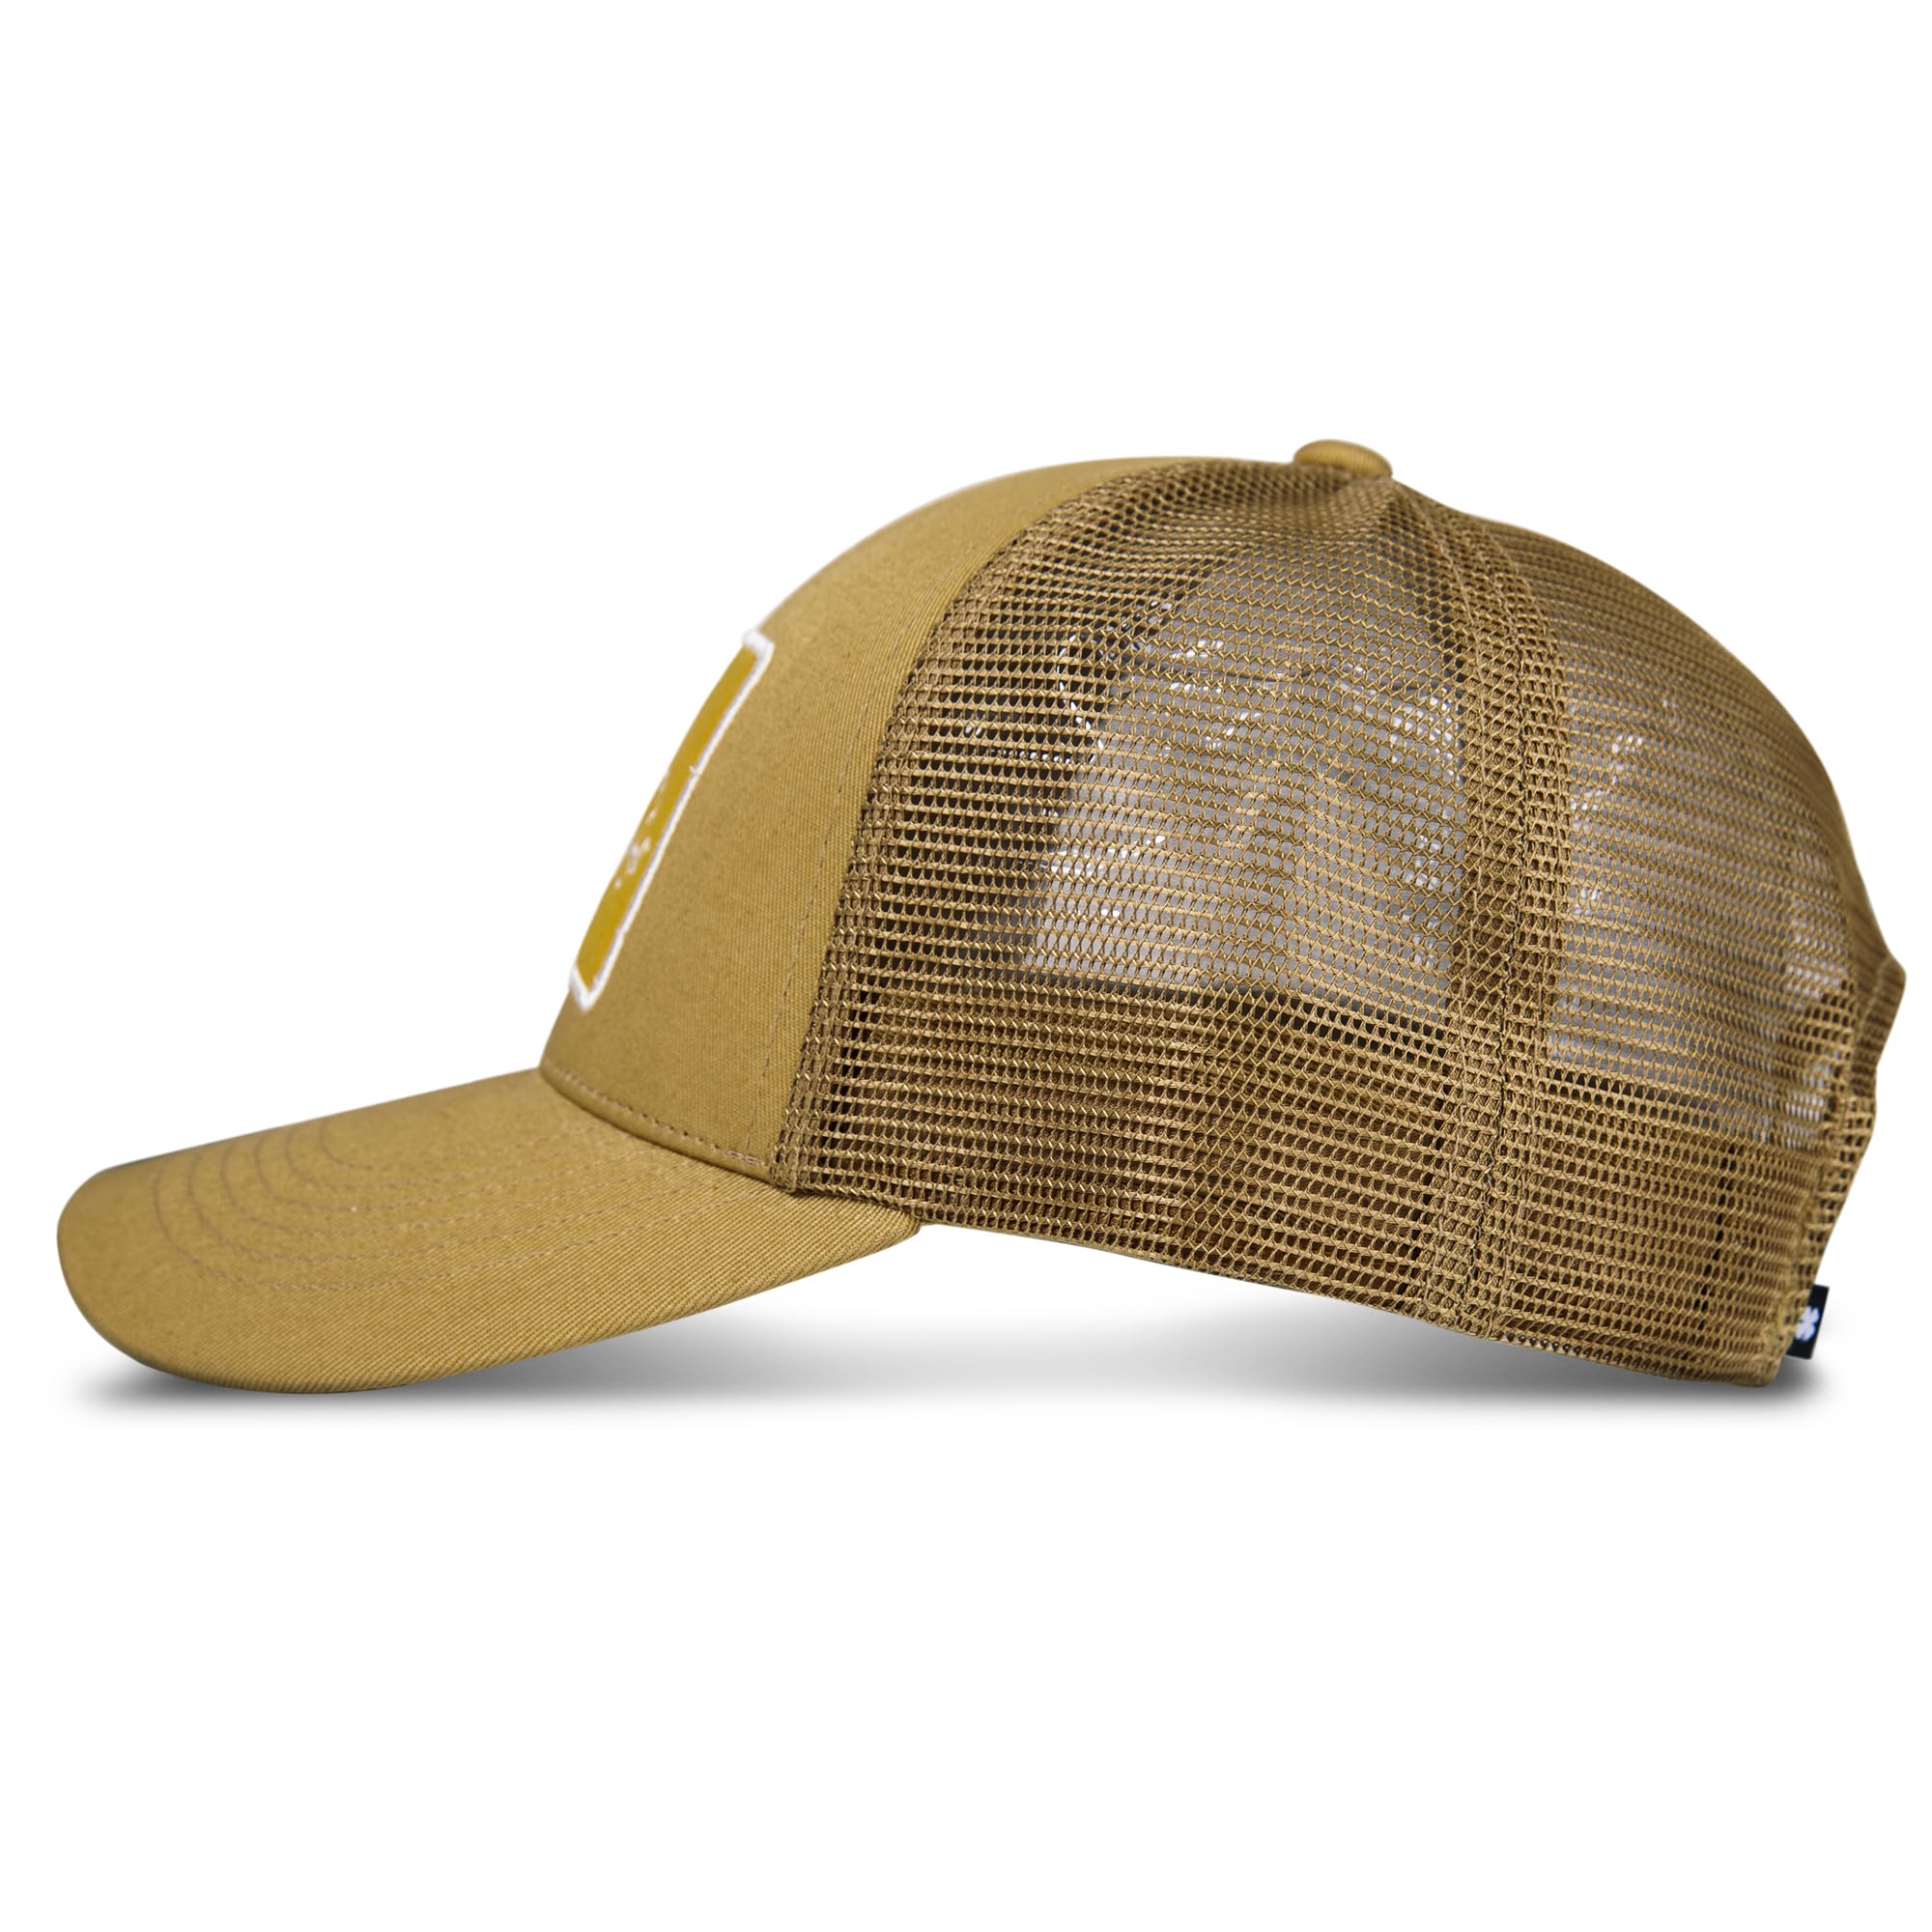 Lucky Brand Trucker Mesh-Back Cap with Adjustable Snapback for Men and Women (One Size Fits Most)